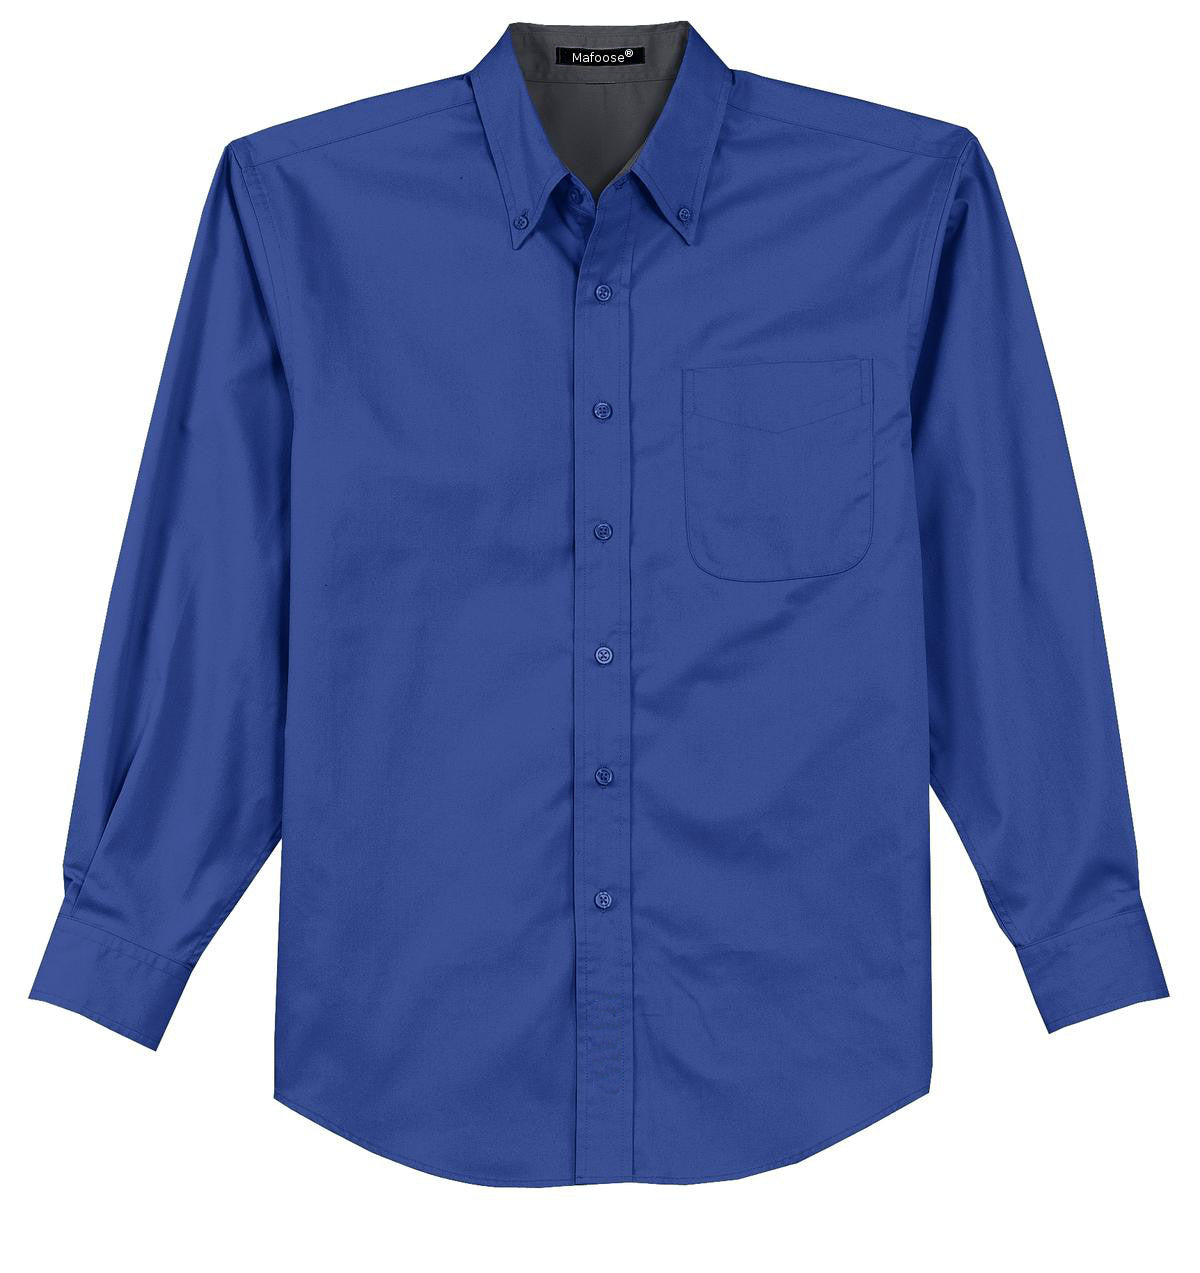 Mafoose Men's Tall Long Sleeve Easy Care Shirt Royal/ Classic Navy-Front